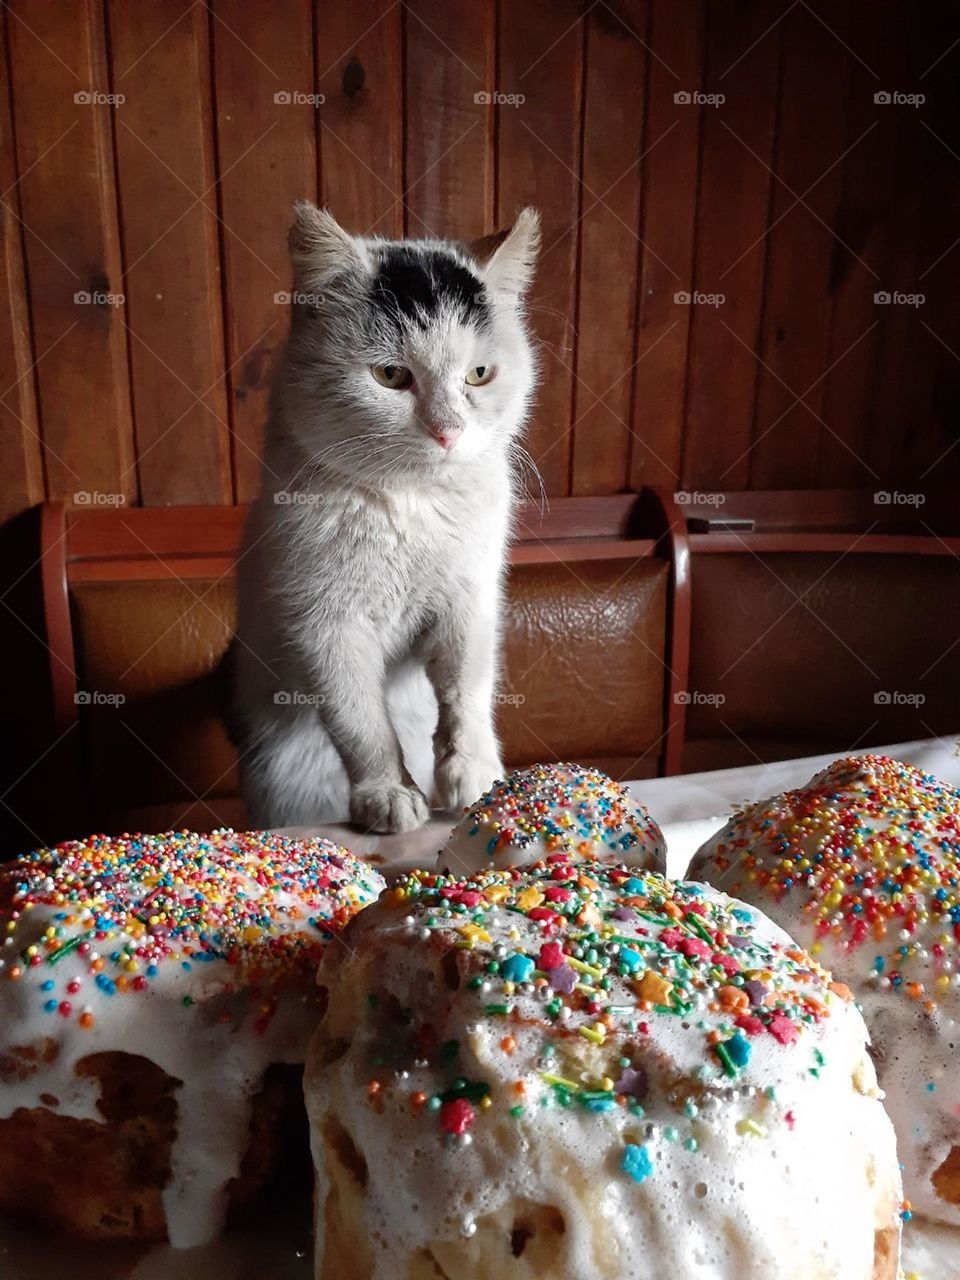 Baked and decorated Easter bread with a village cat